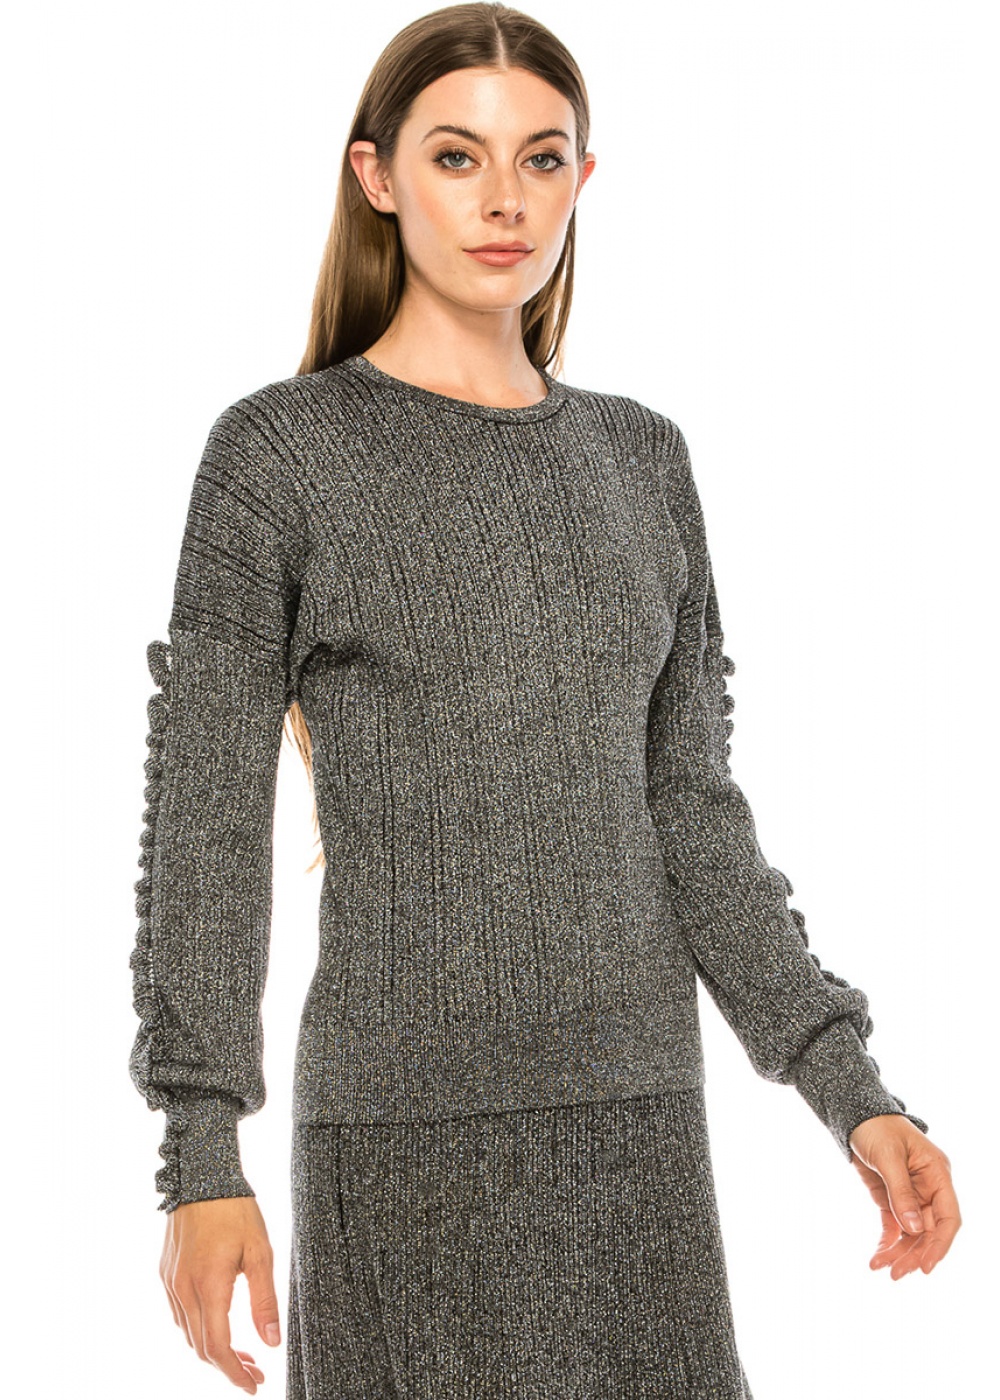 Silver lurex sweater with blouson sleeves